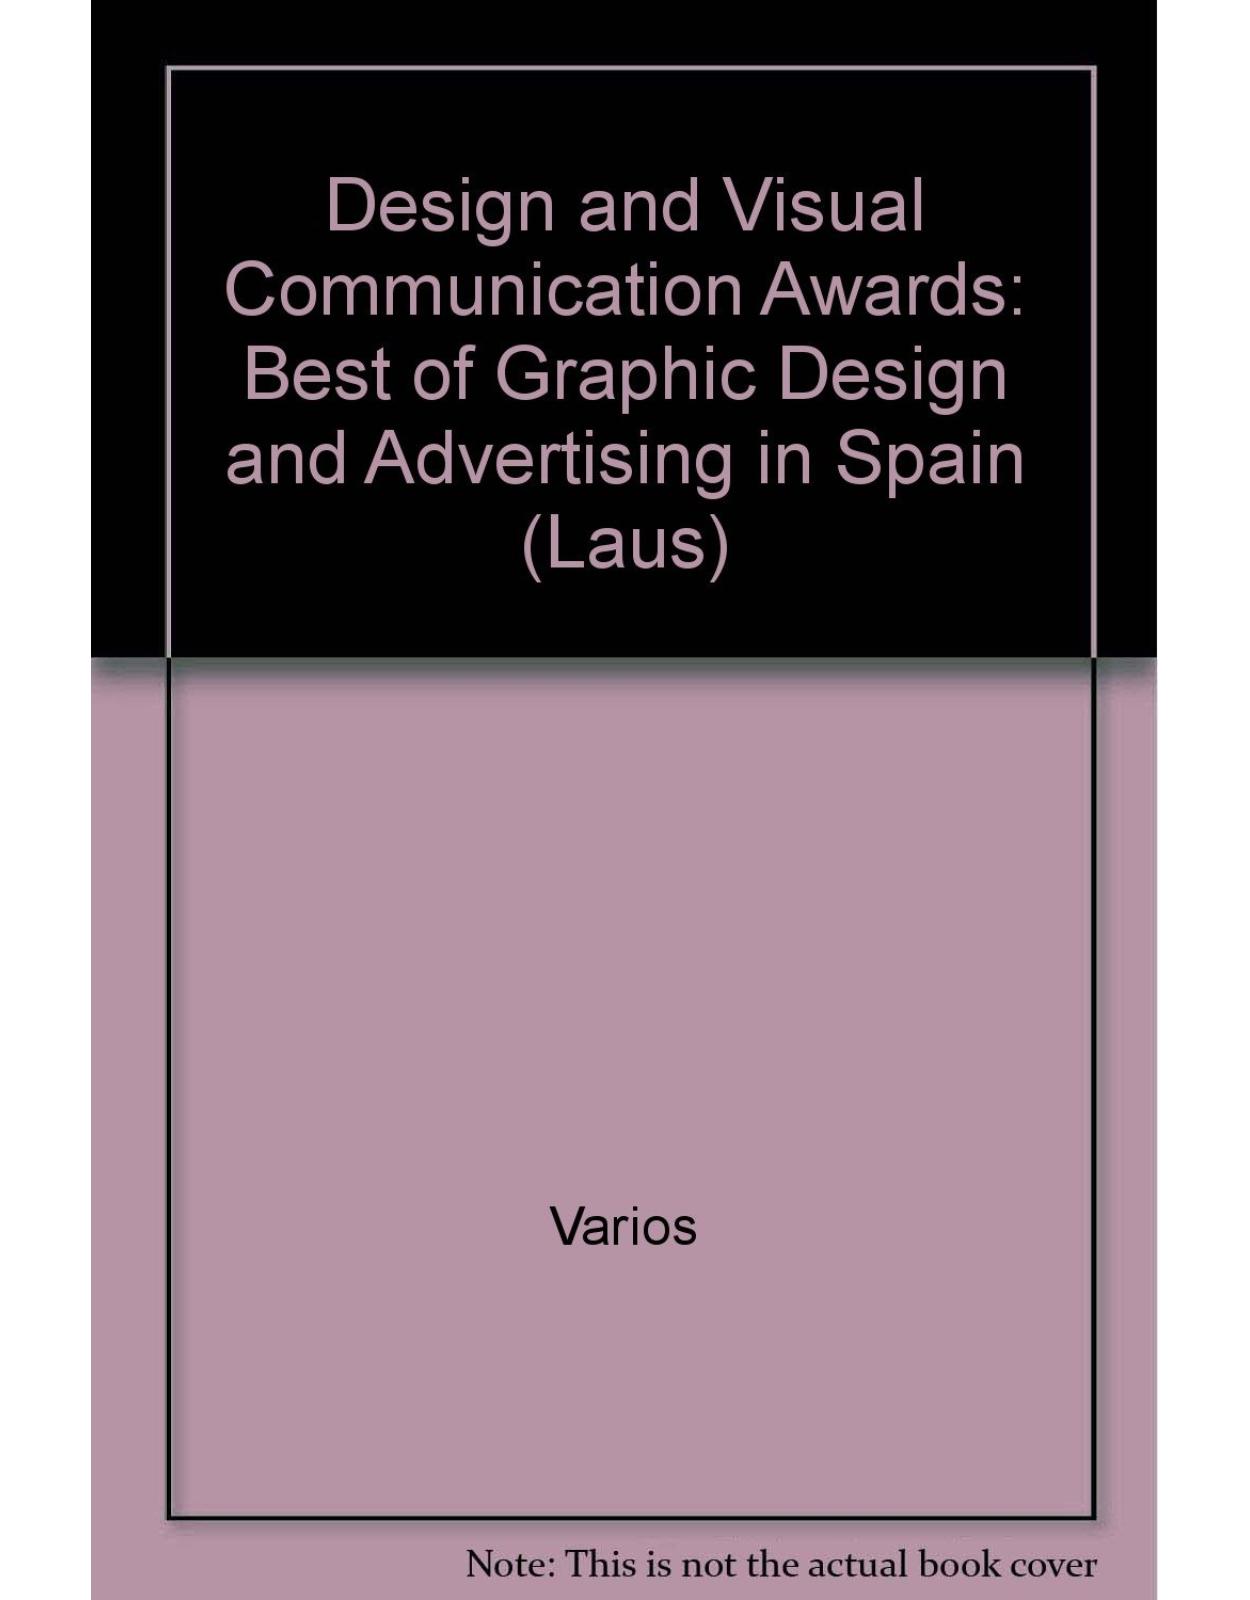 Design and Visual Communication Awards: Best of Graphic Design and Advertising in Spain (Laus) 